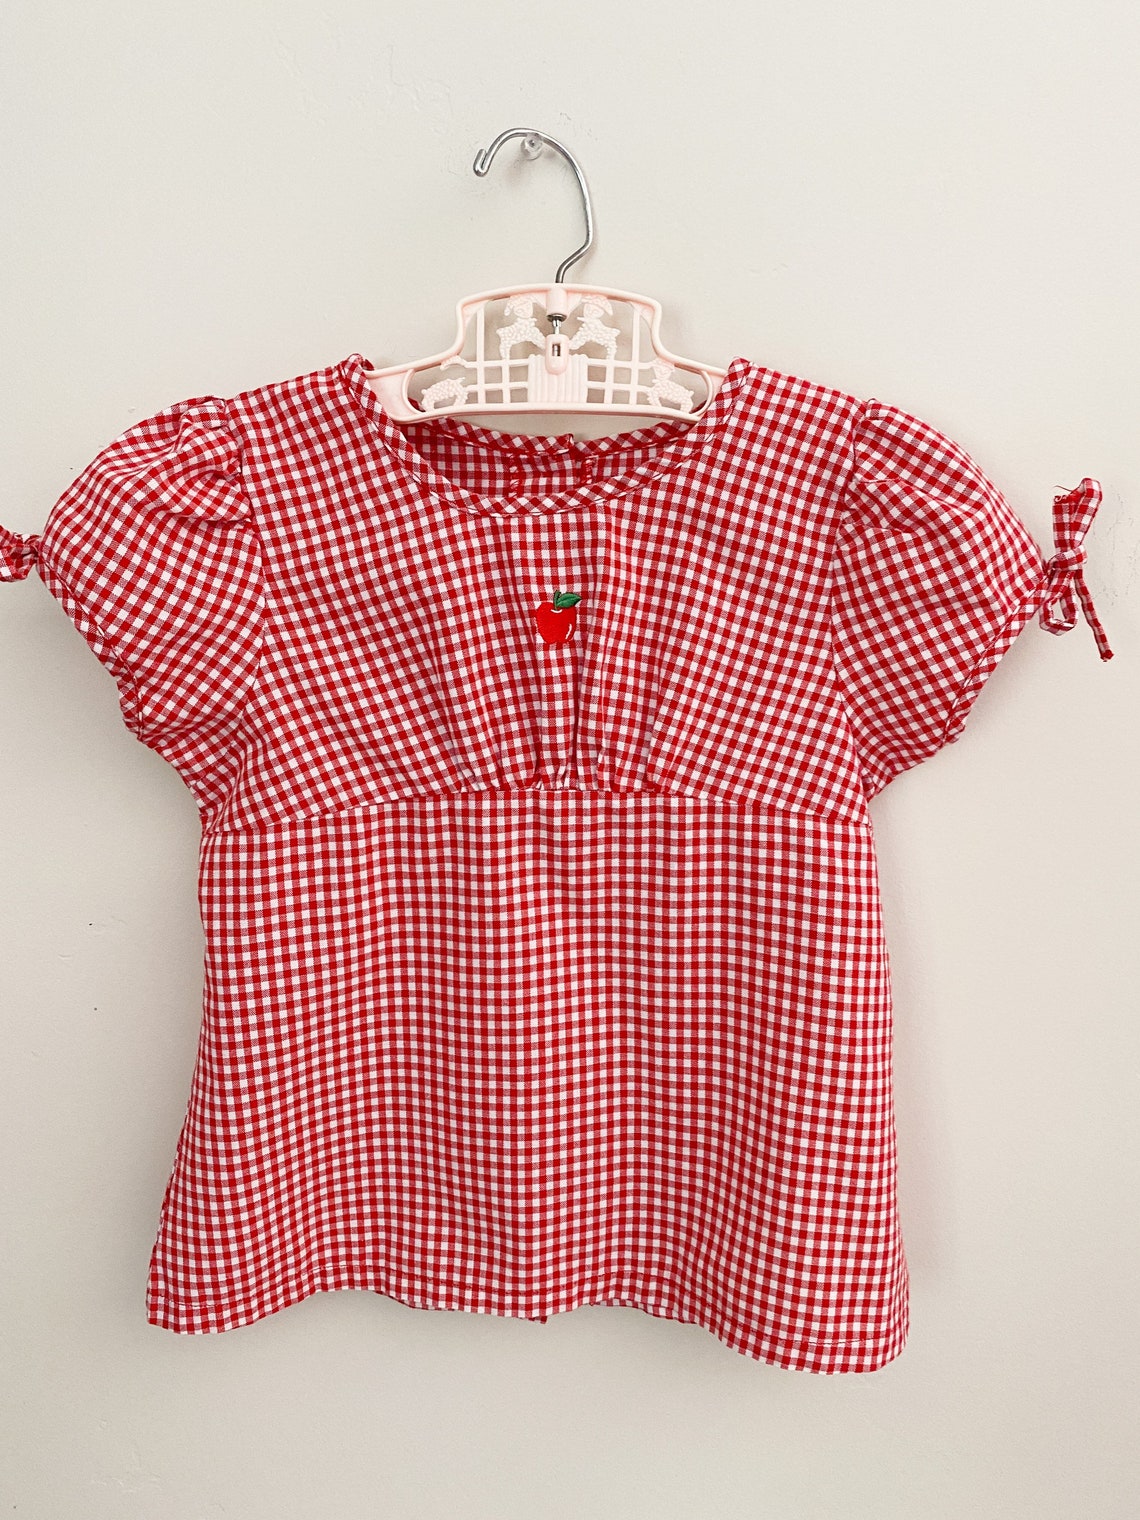 Vintage Top 90s Early 2000s Red Gingham Plaid Shirt Apple Good - Etsy